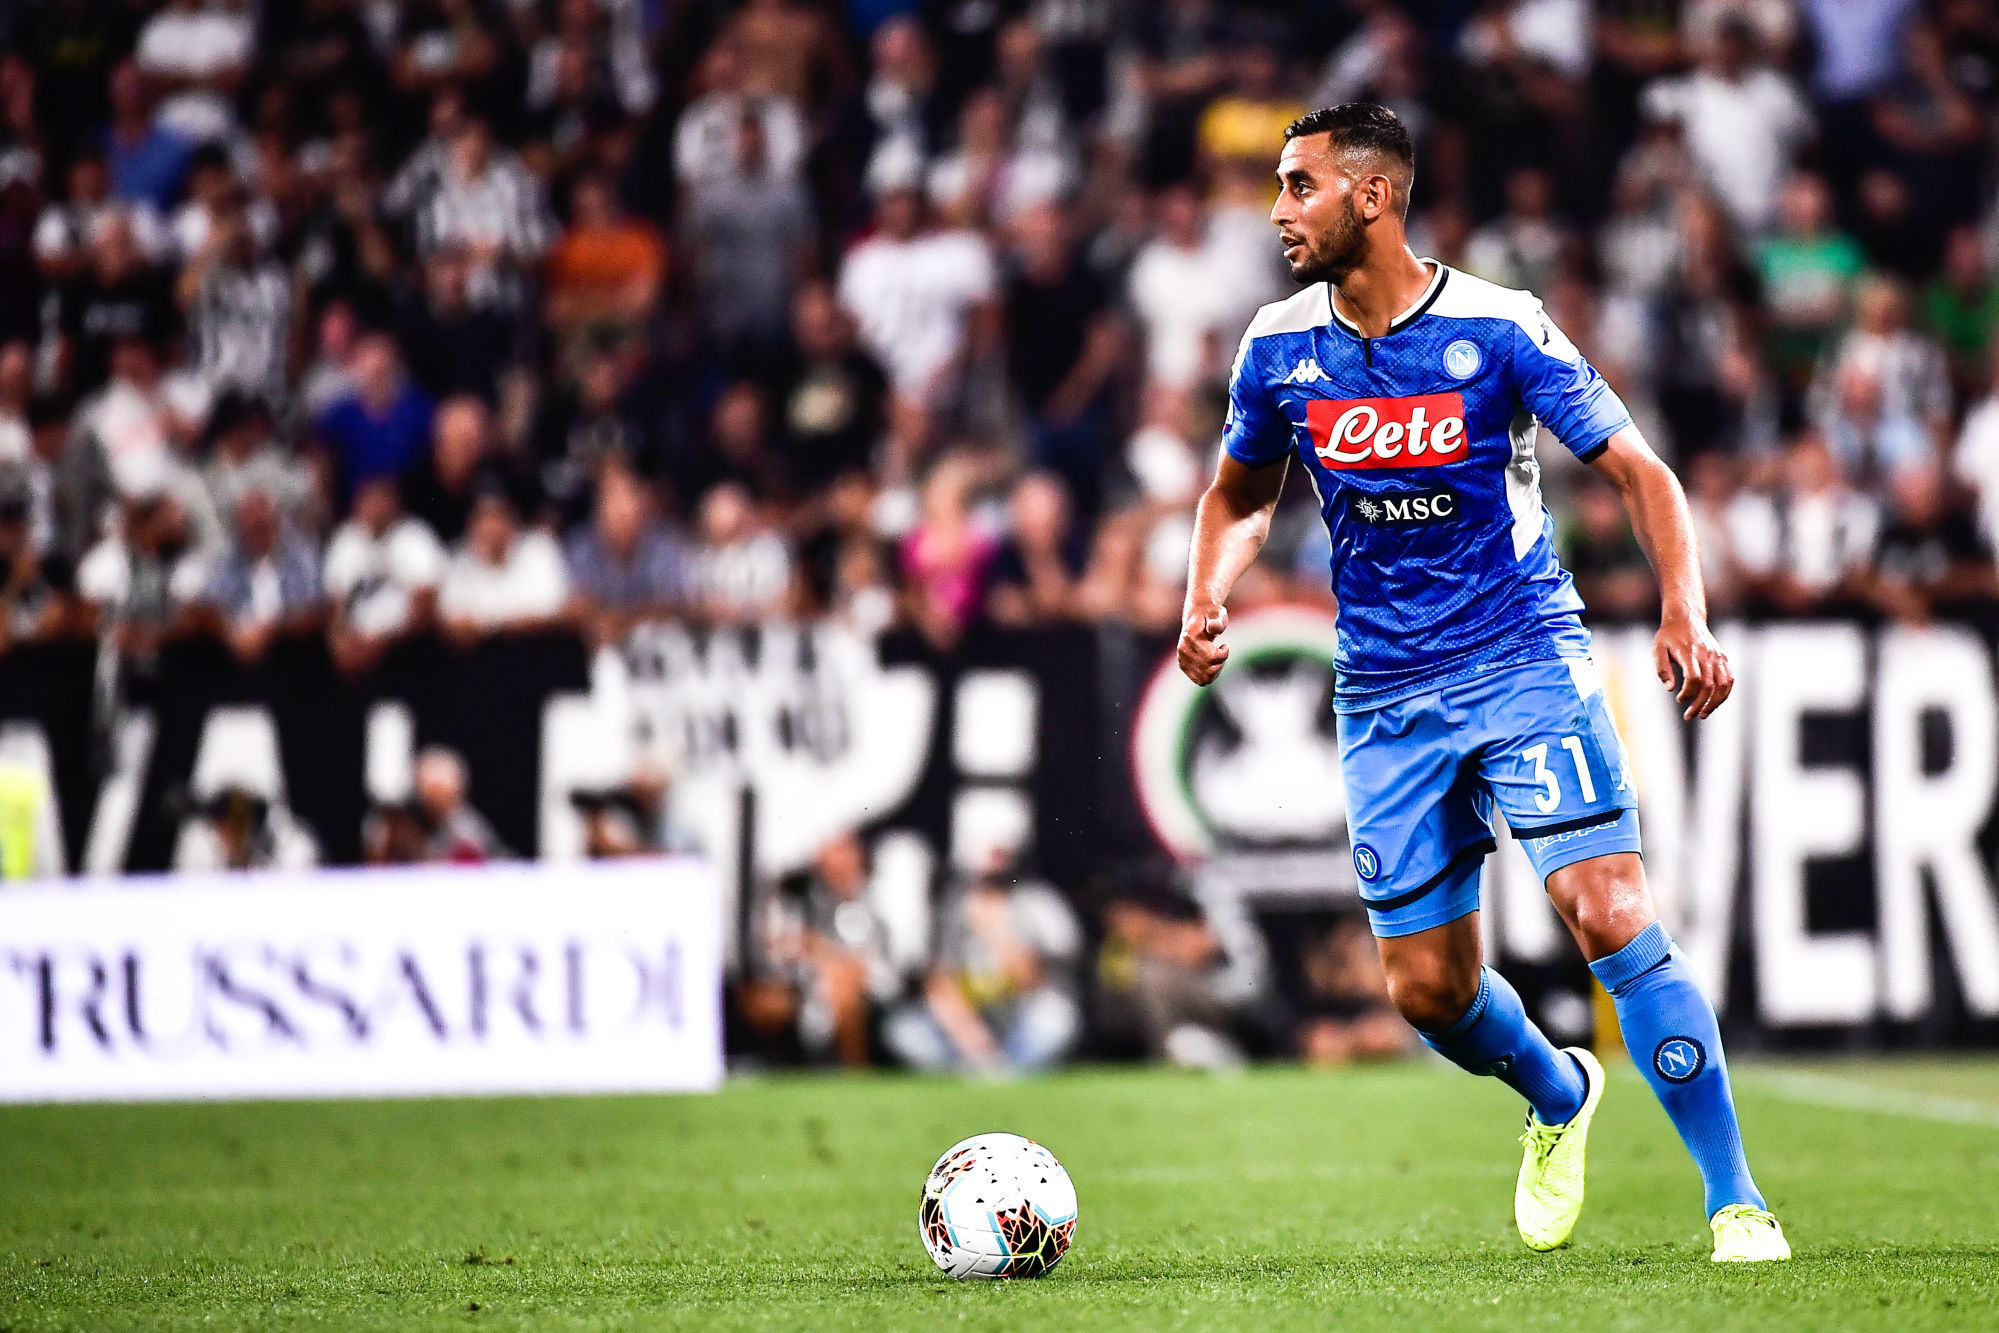 Faouzi Ghoulam during the Serie A match between Juventus and Napoli on 31th August 2019
Photo : LaPresse / Icon Sport